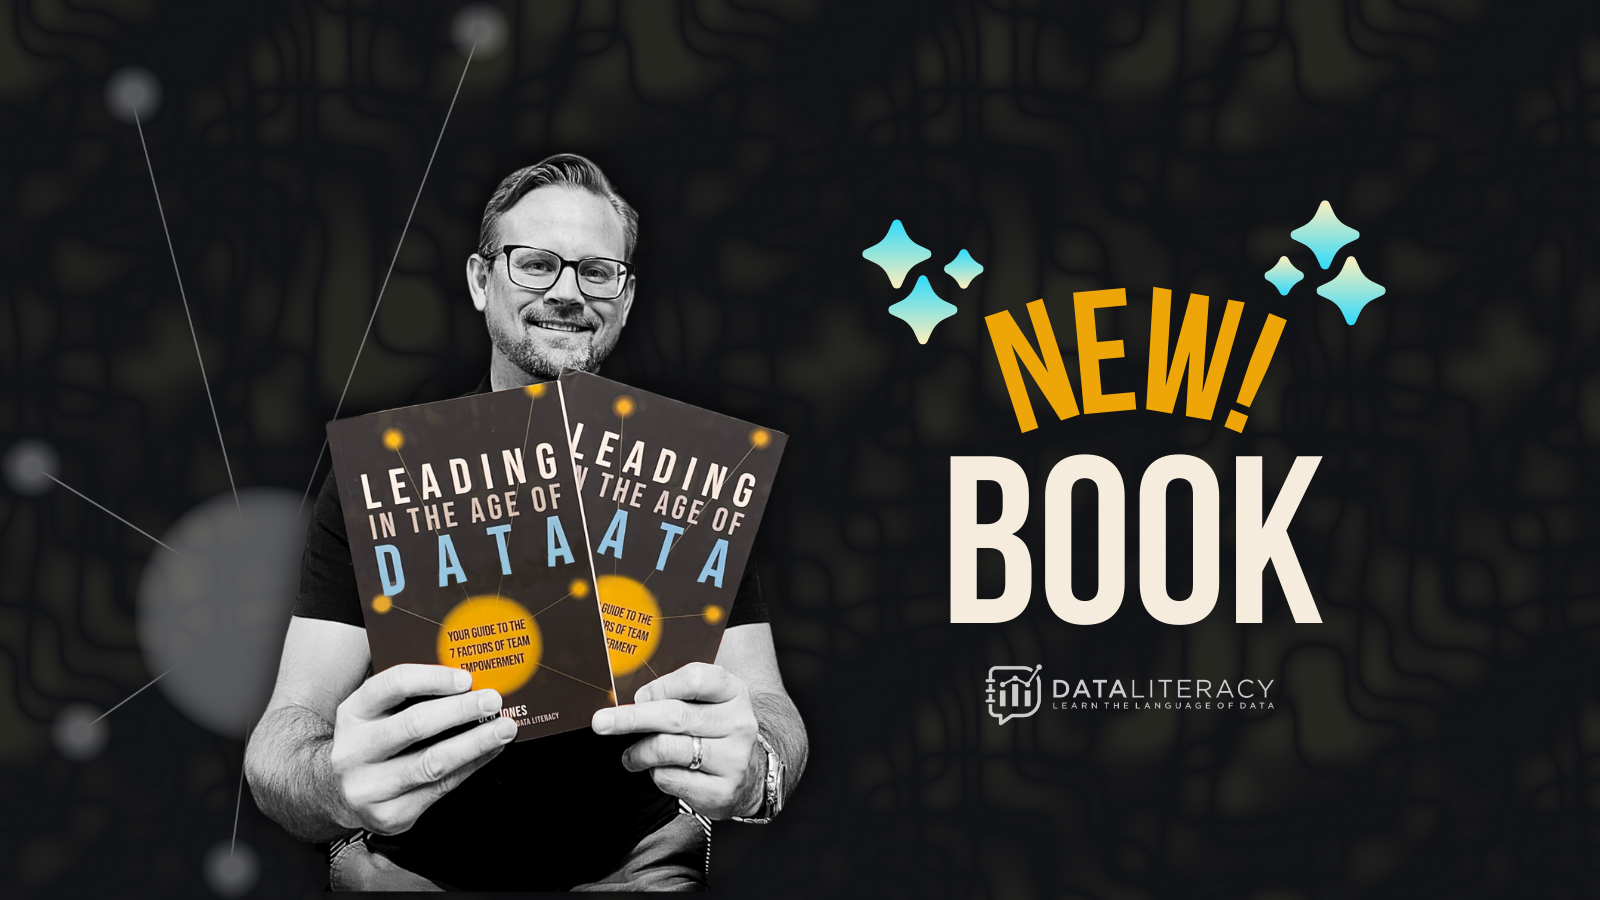 Ben Jones holding his new book called Leading in the Age of Data with text "new book" next to him